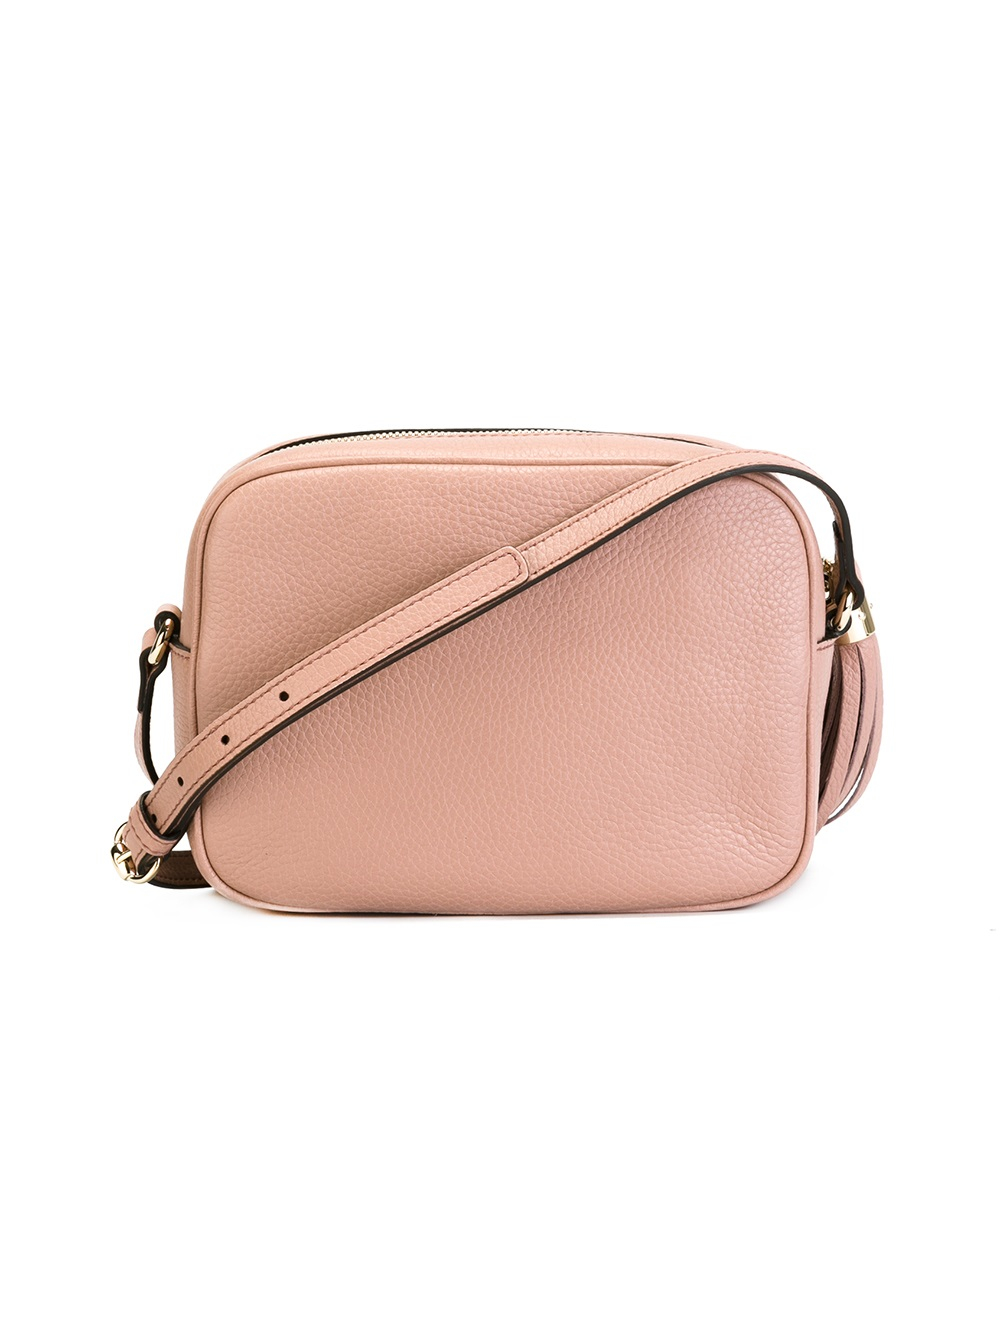 Gucci Disco Bag Soho in Pink - Lyst